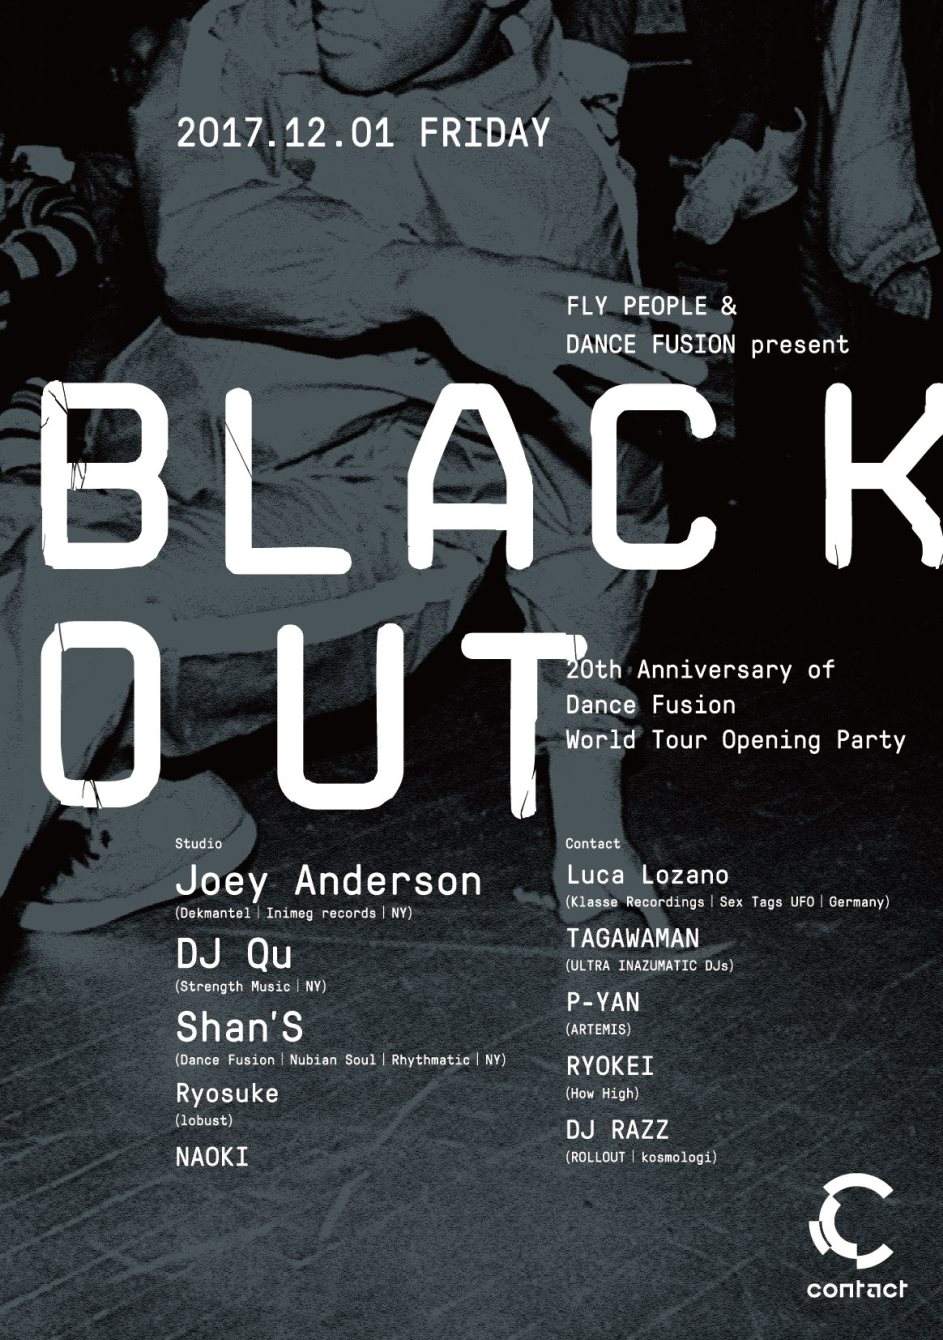 FLY People & Dance Fusion present “BLACK OUT” - フライヤー表